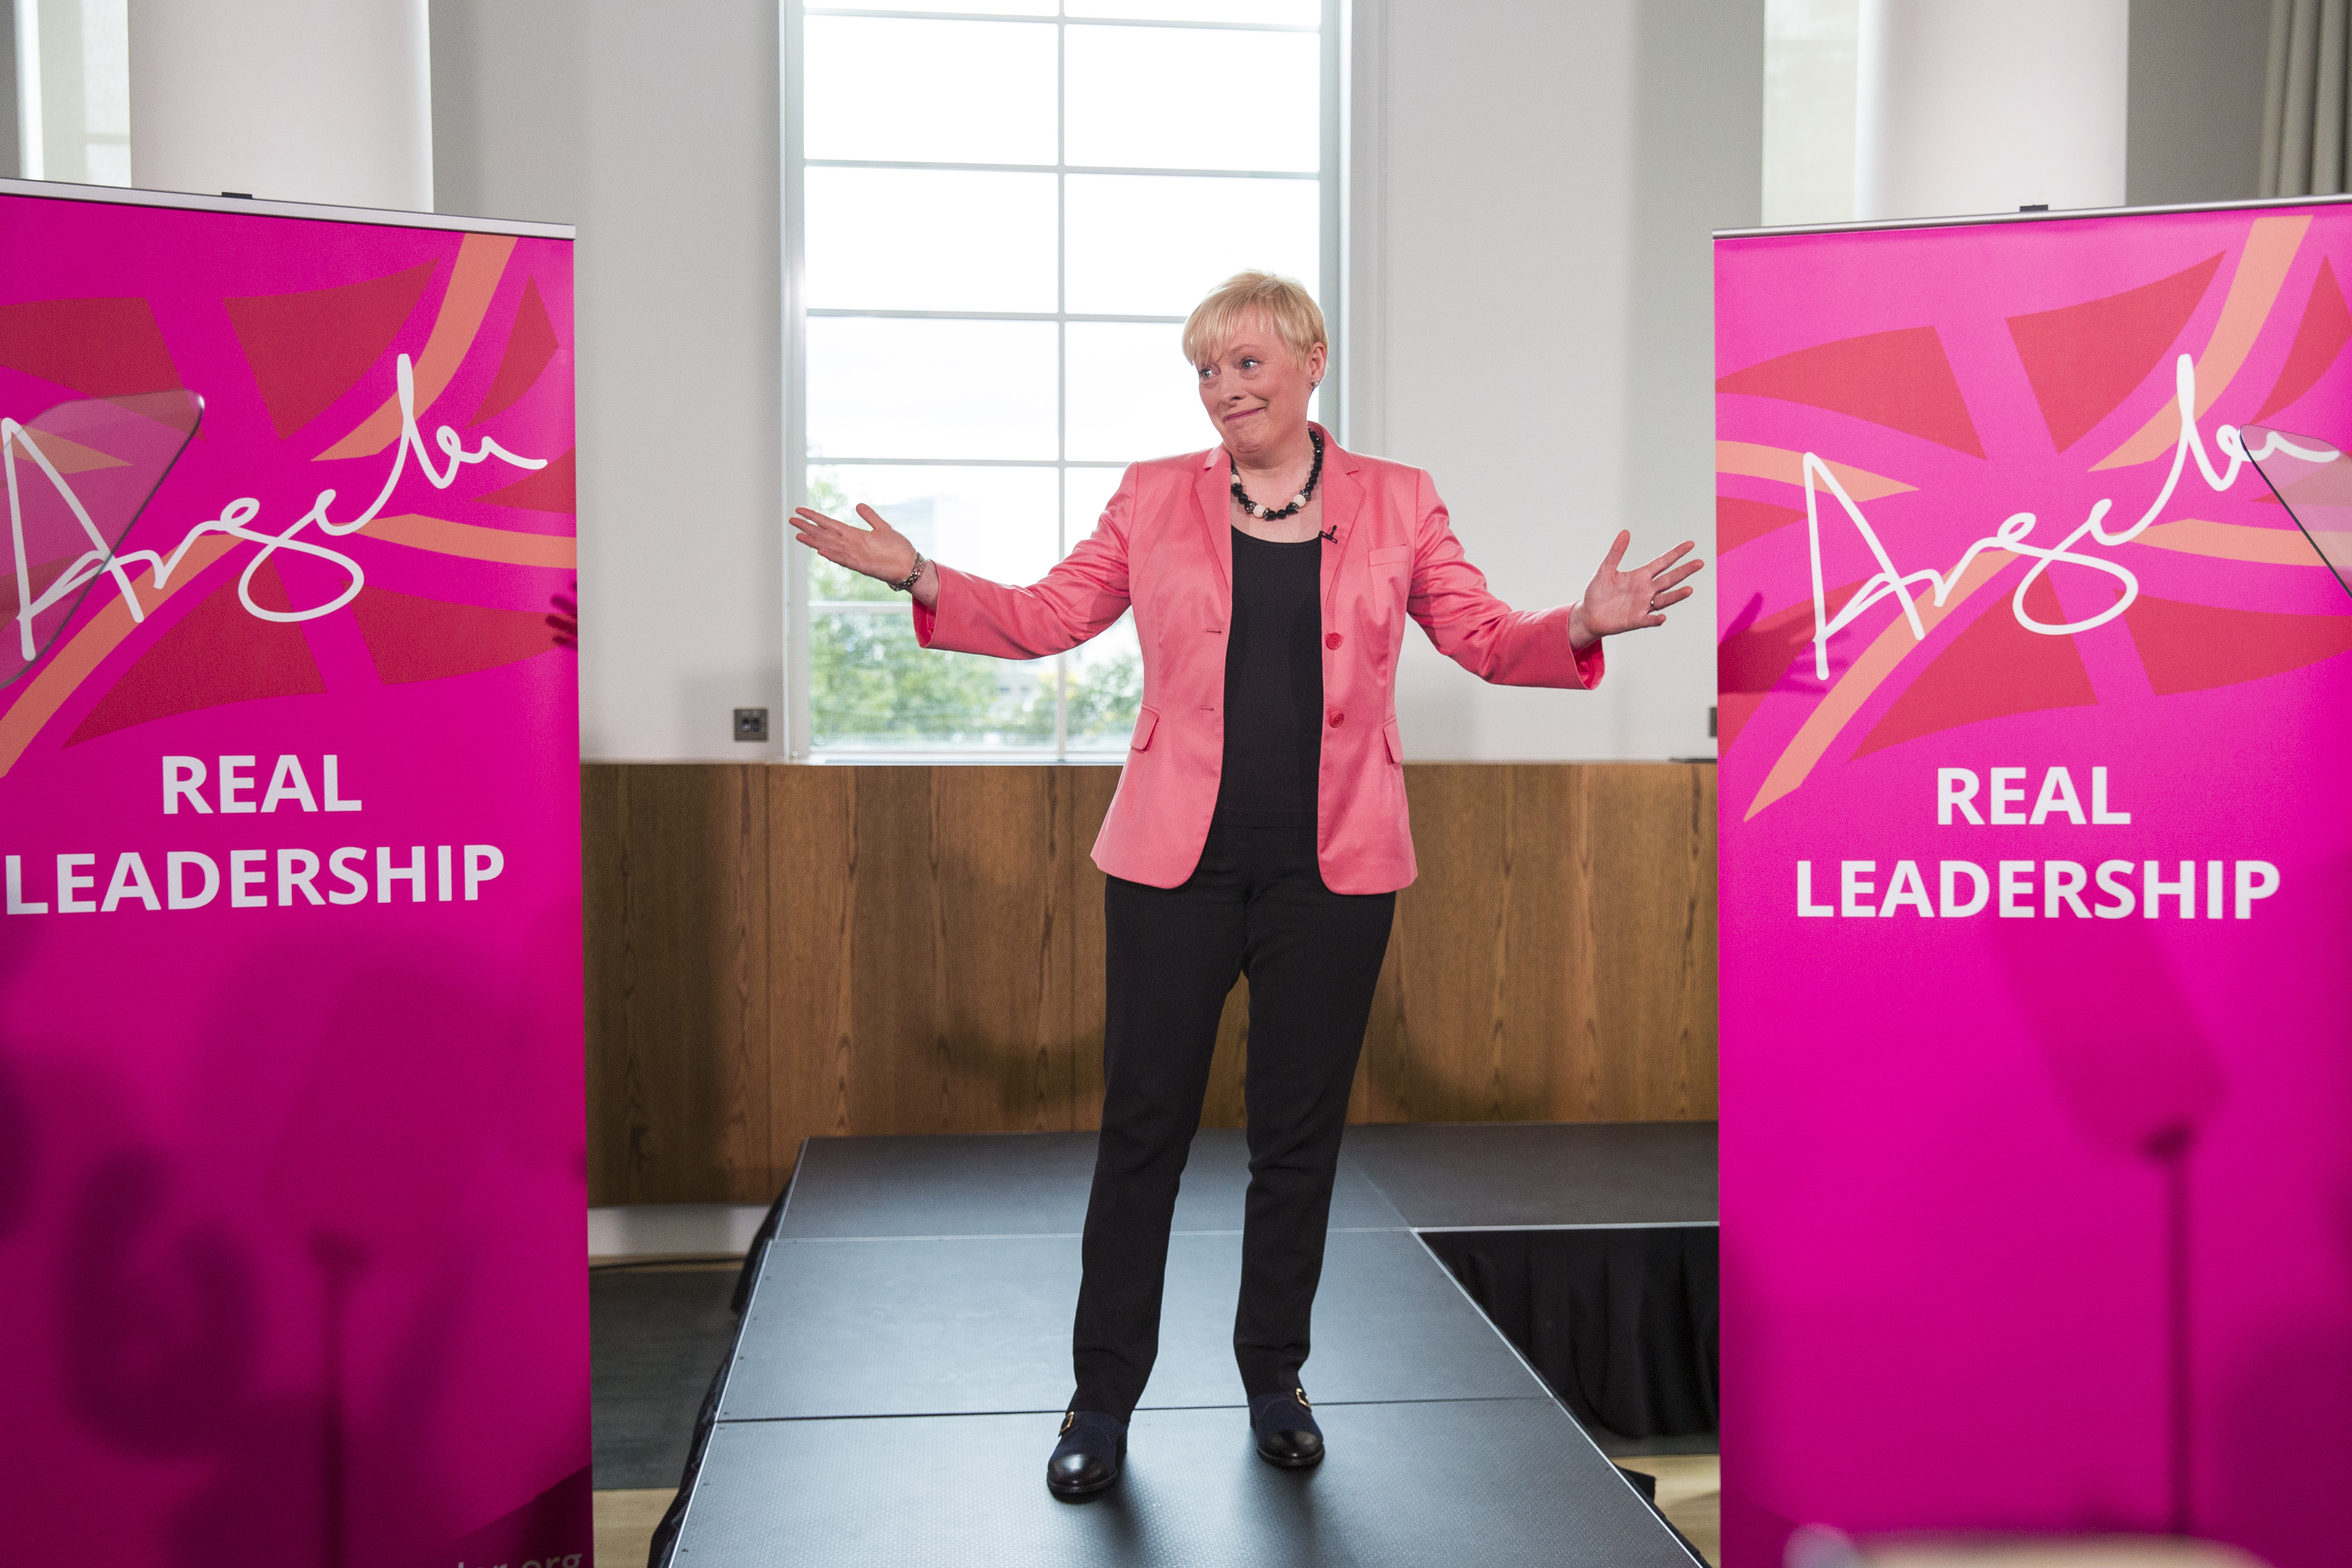 Former Shadow Cabinet Minister Angela Eagle launches her bid for Labour leadership at a press conference at Savoy Place on July 11, 2016 in London, England. (Jack Taylor—Getty Images)